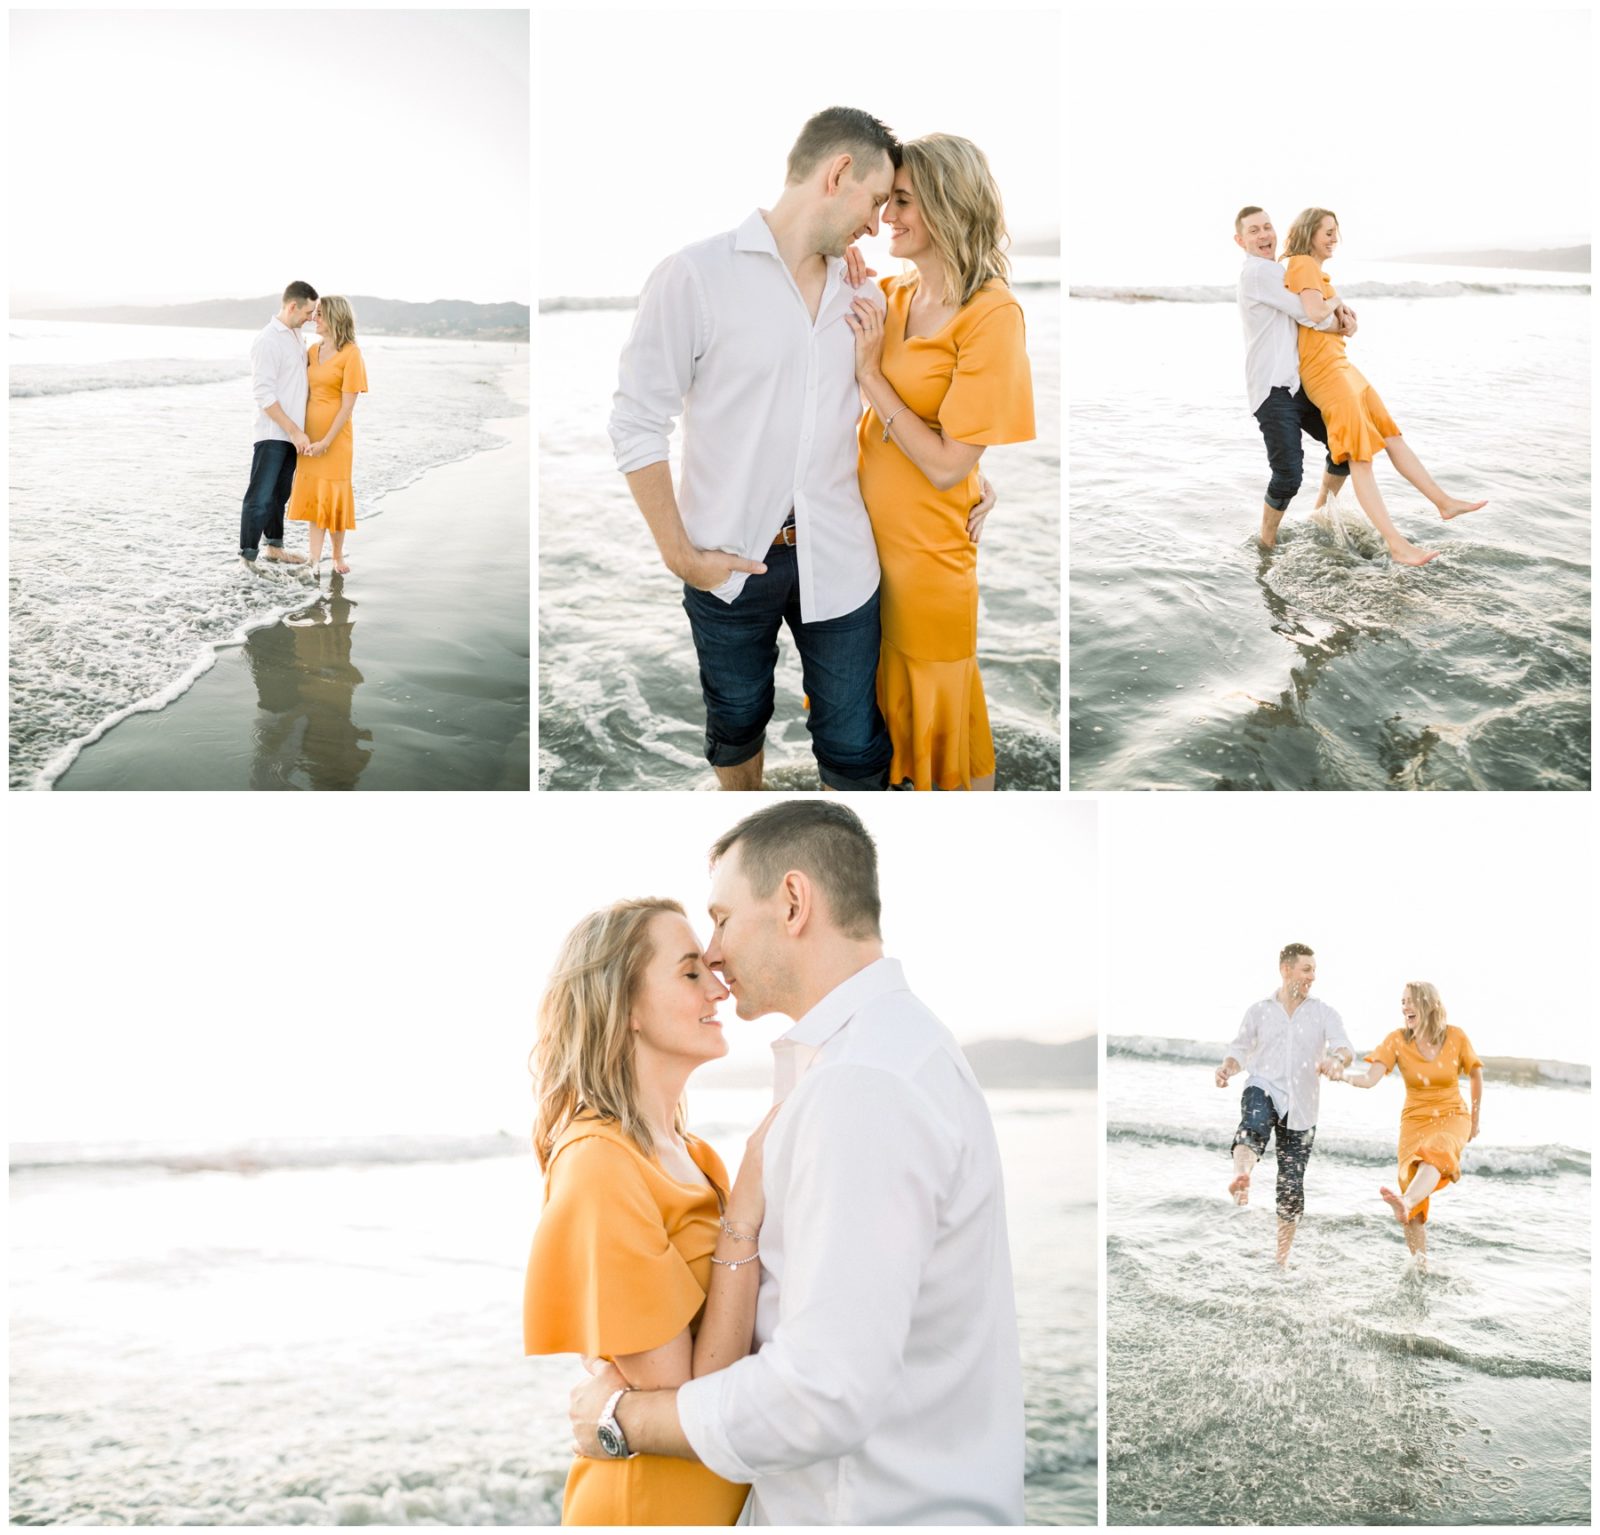 Engagement Session in Los Angeles at the beach. Couple having fun playing in the ocean. 